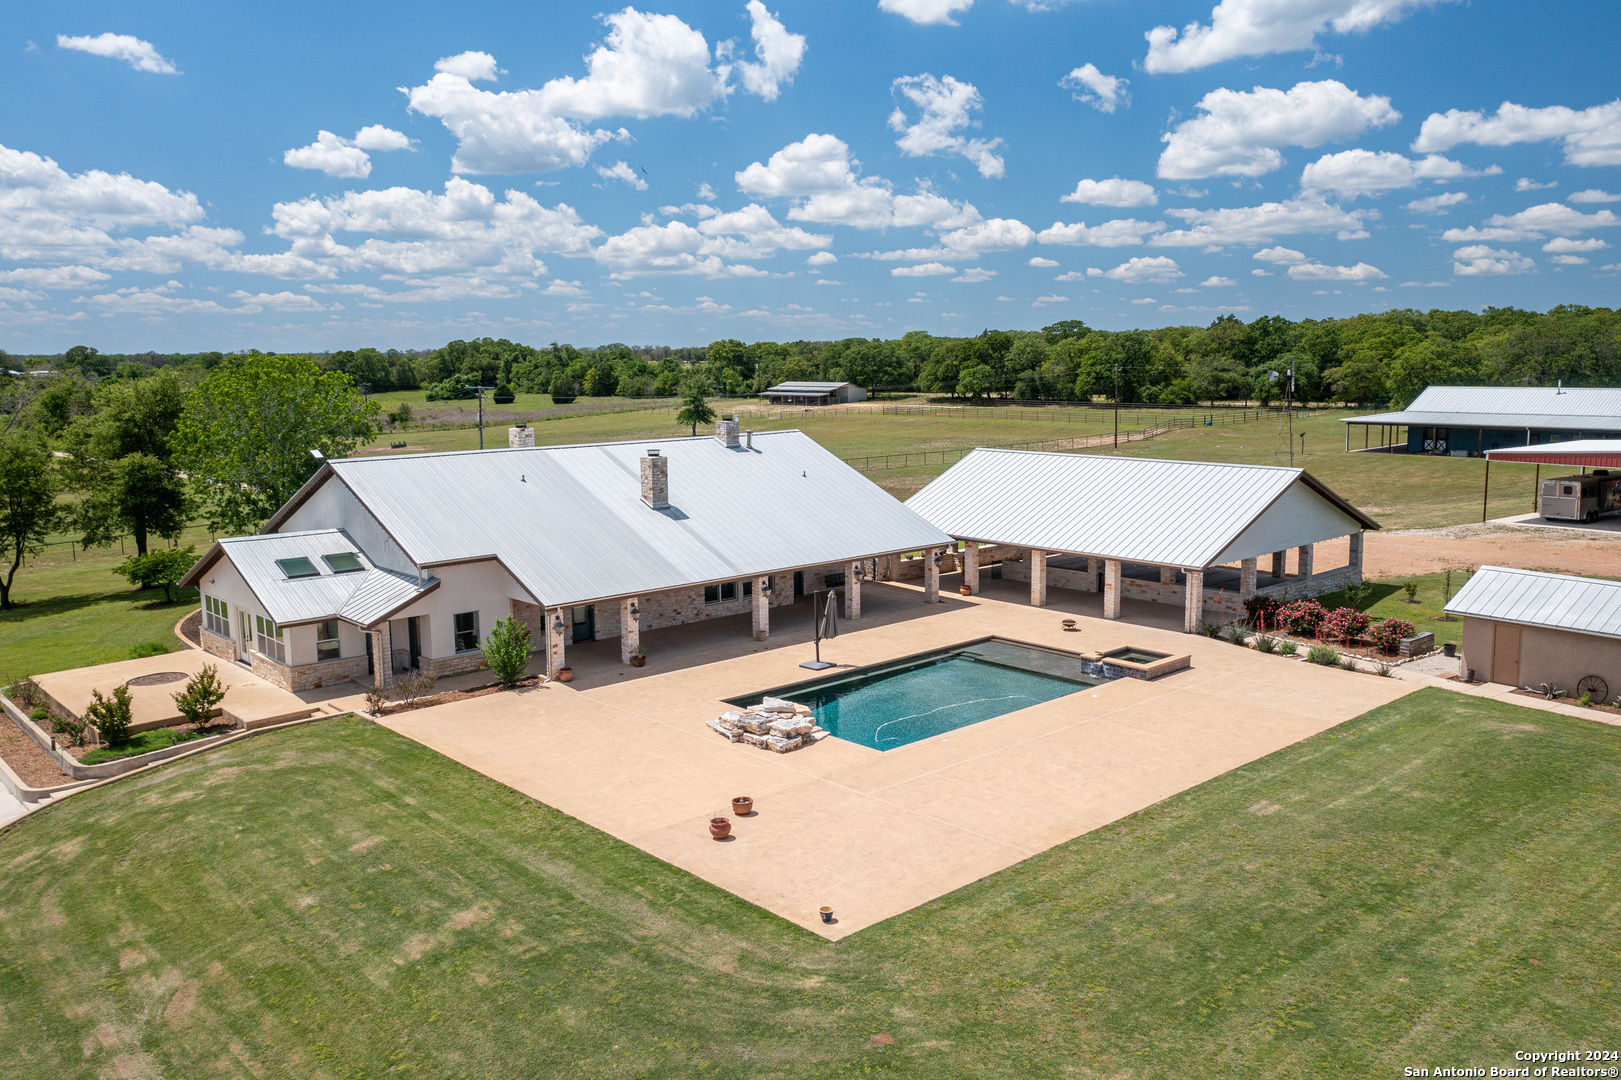 9560 old colony line, Dale, TX 